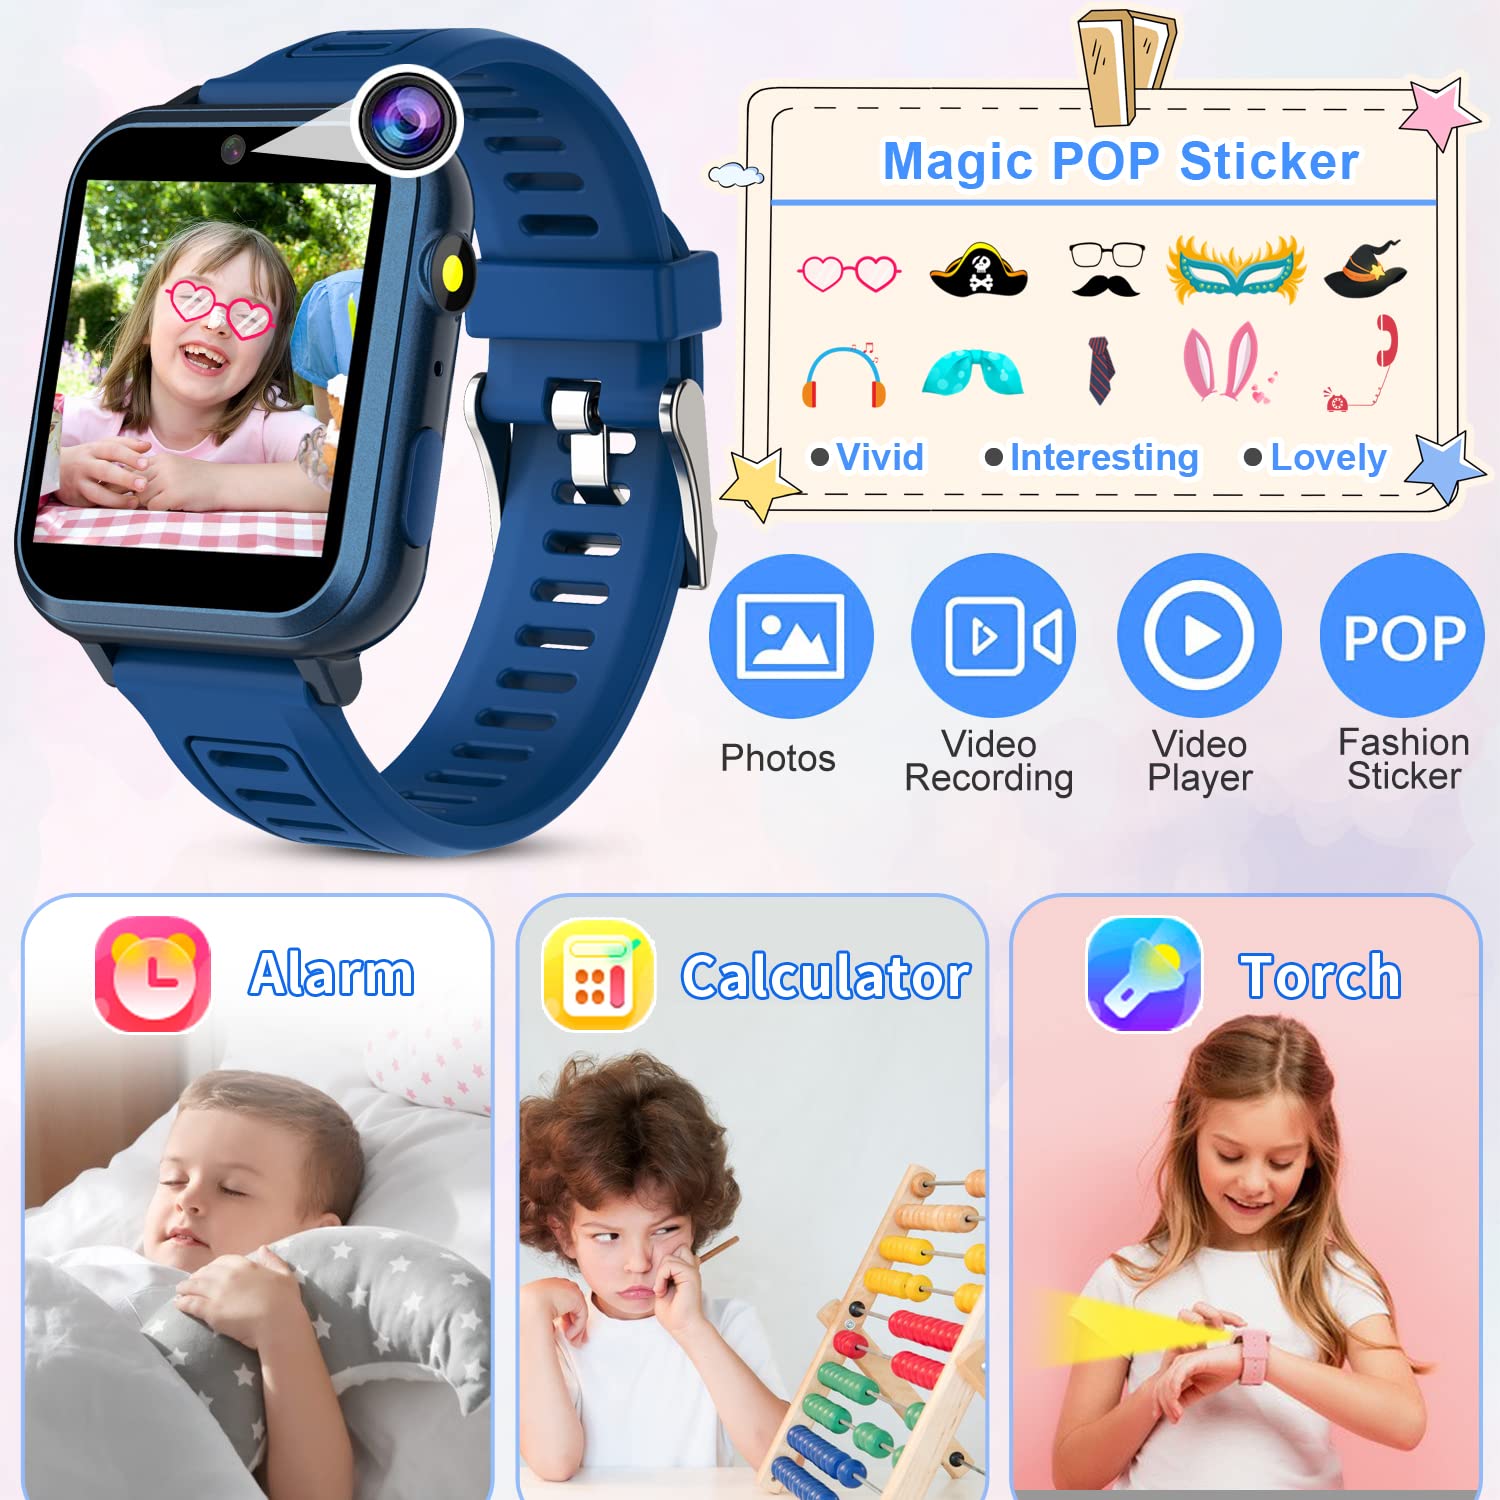 GCP Products Smart Watch For Kids, Kids Smart Watch Boys With Hd Touch Screen 16 Games Music Player Camera Alarm Clock Pedometer Torch Cal…